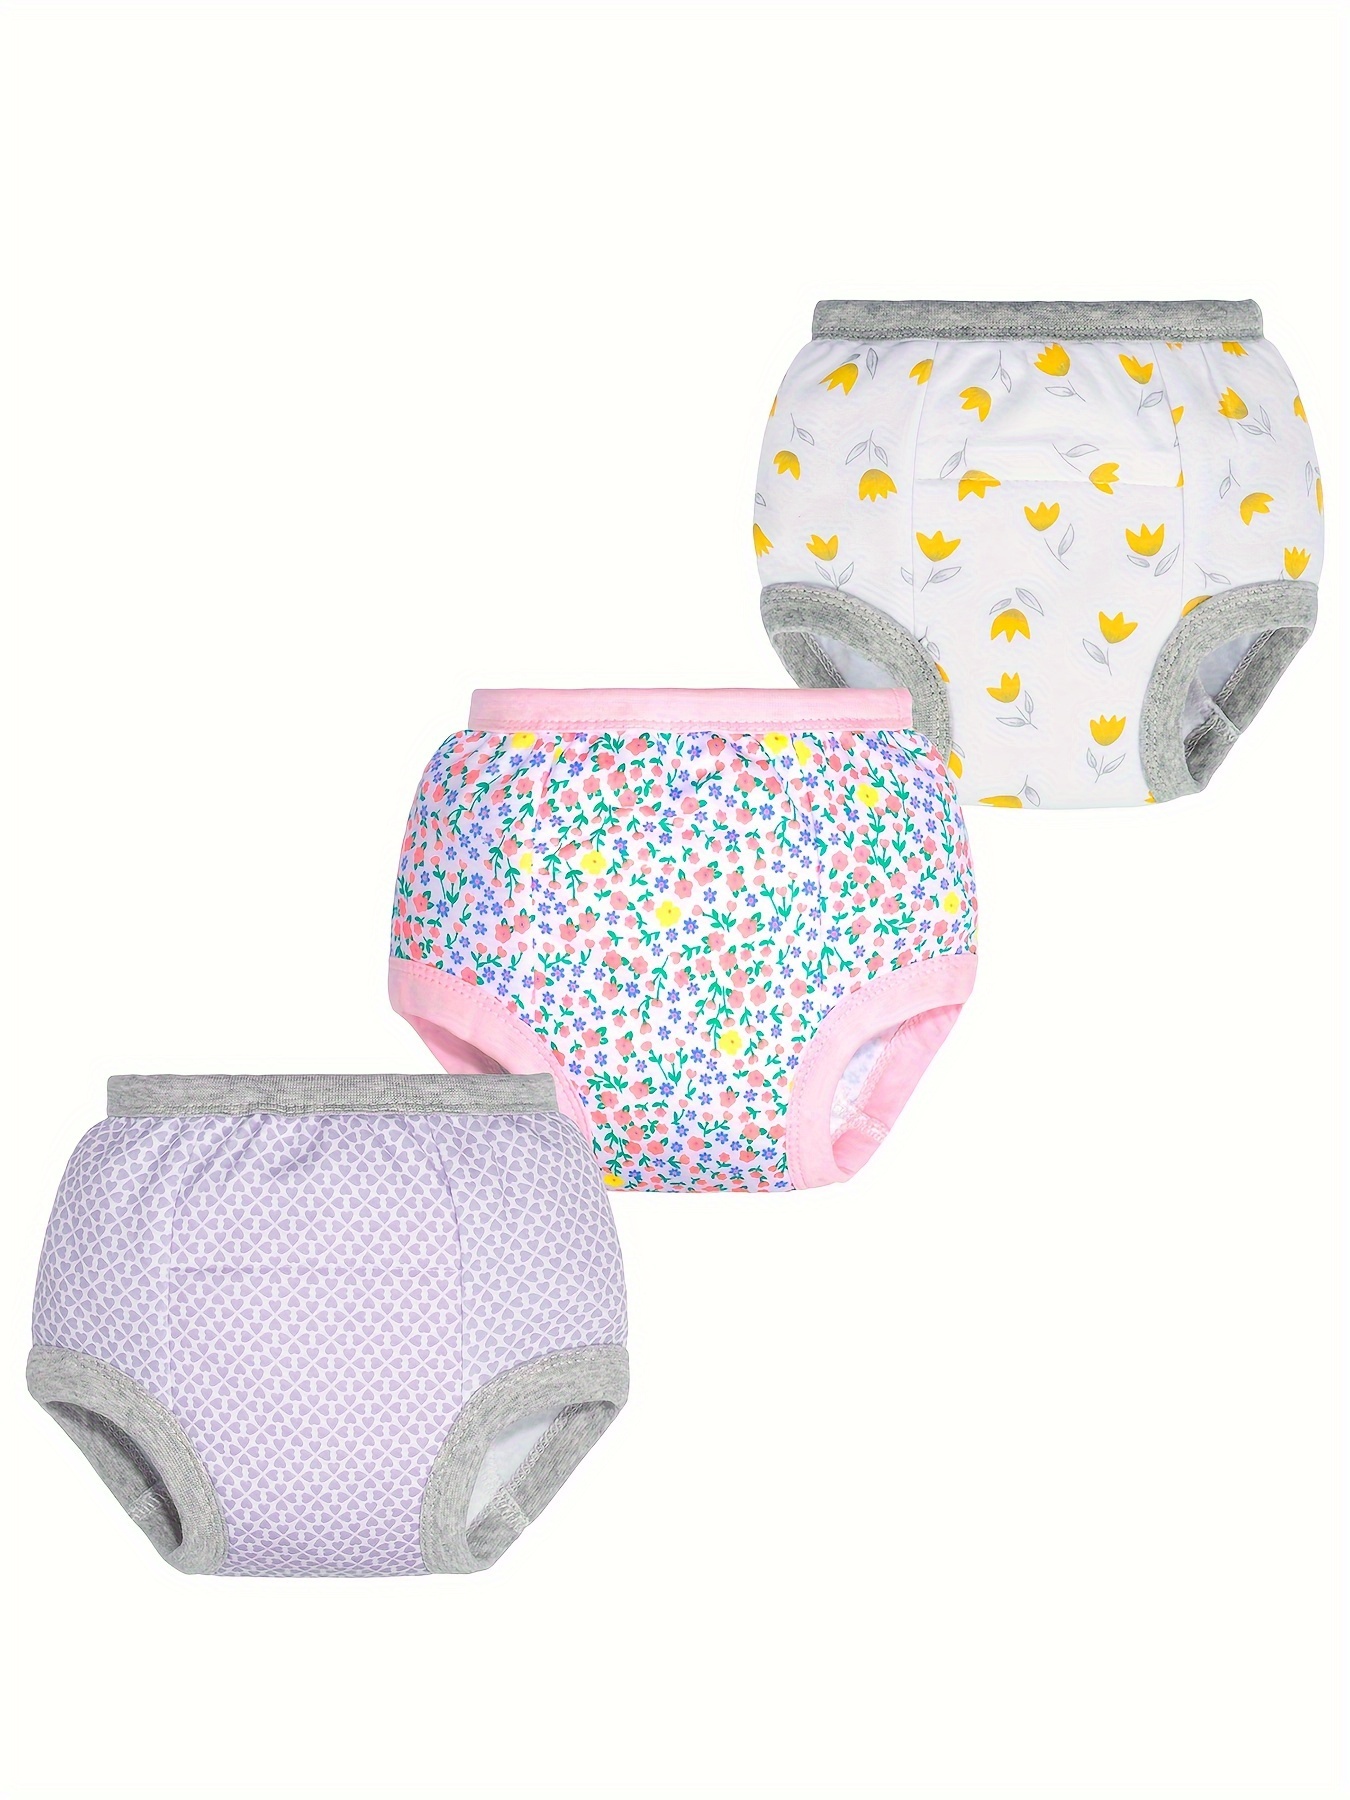 Waterproof Adult Baby Traning Pants DDLG Reusable Nappies Adult Aloth  Diaper Potty Underweaer Panties With Milk